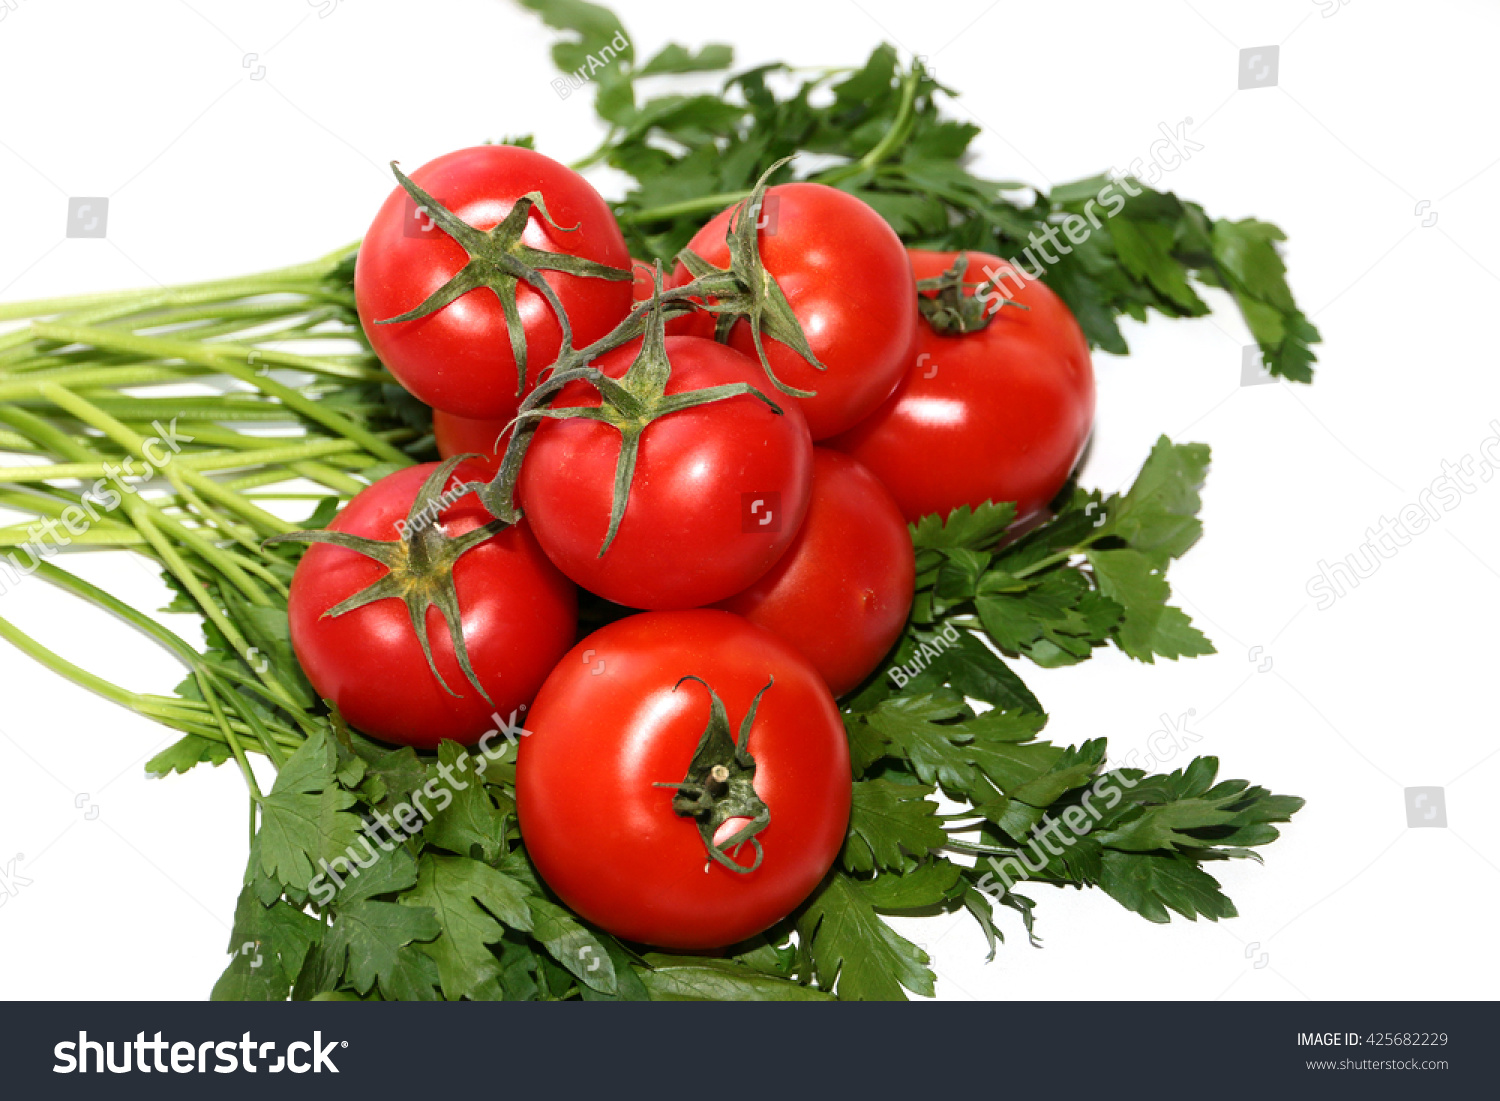 Harvest ripe tomatoes and a bunch of parsley #425682229